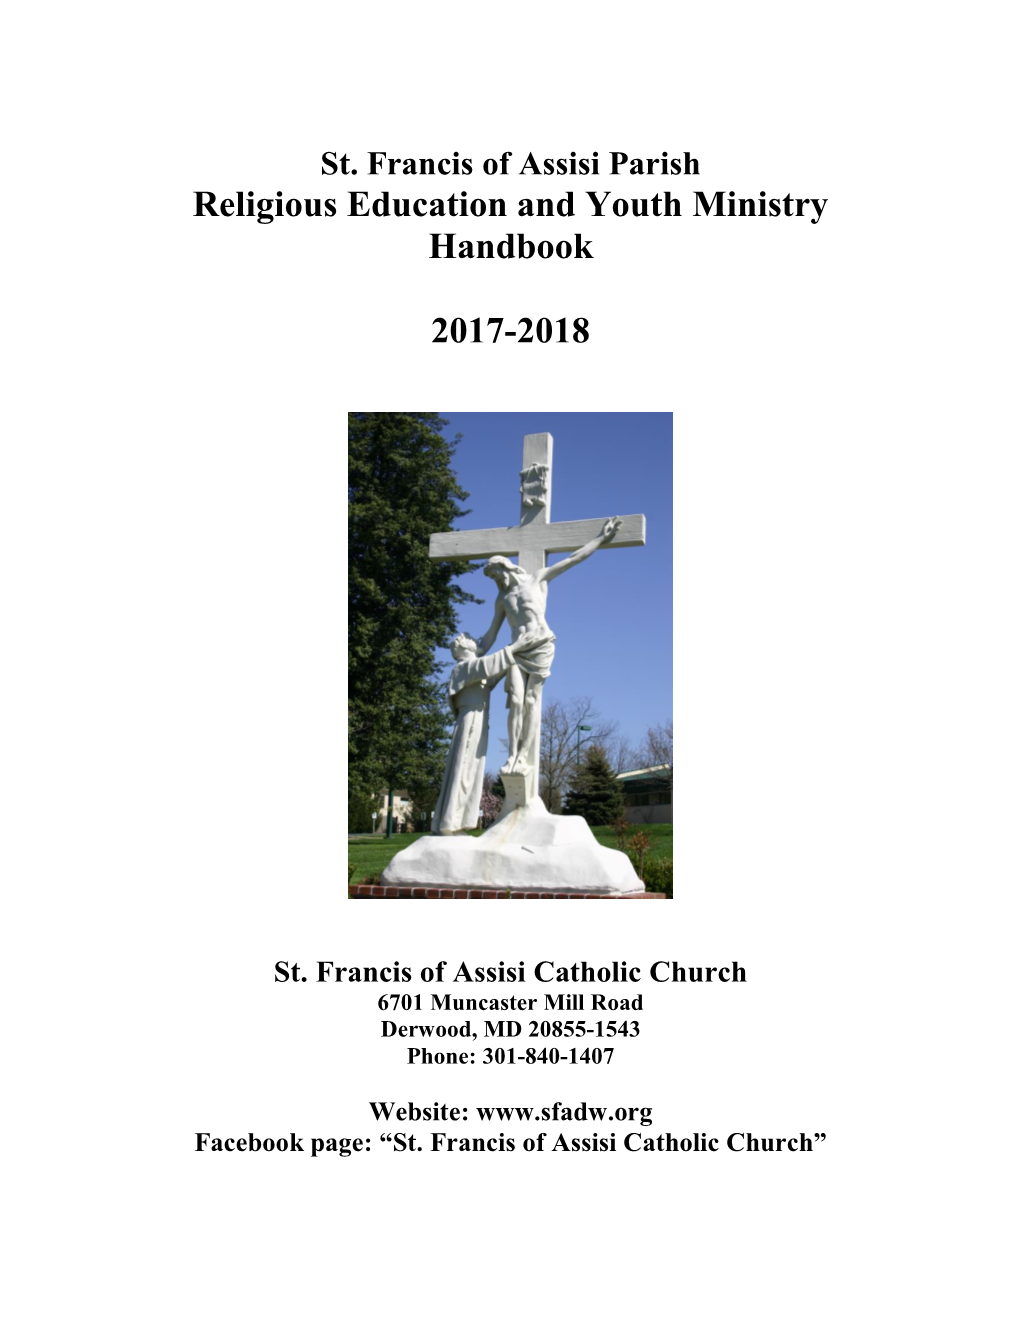 Religious Education and Youth Ministry Handbook 2017-2018